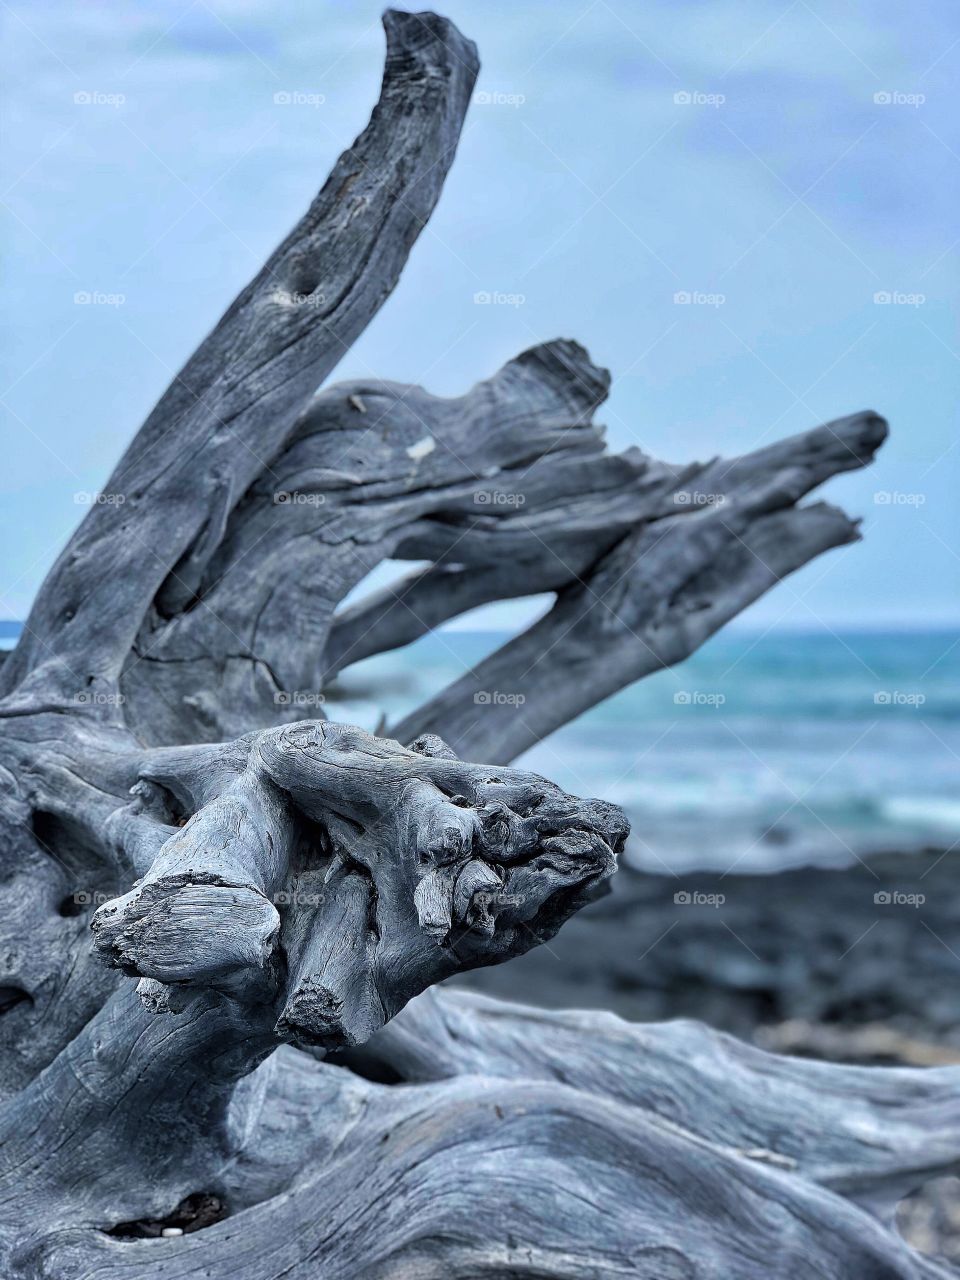 Oh driftwood, what have you seen!?